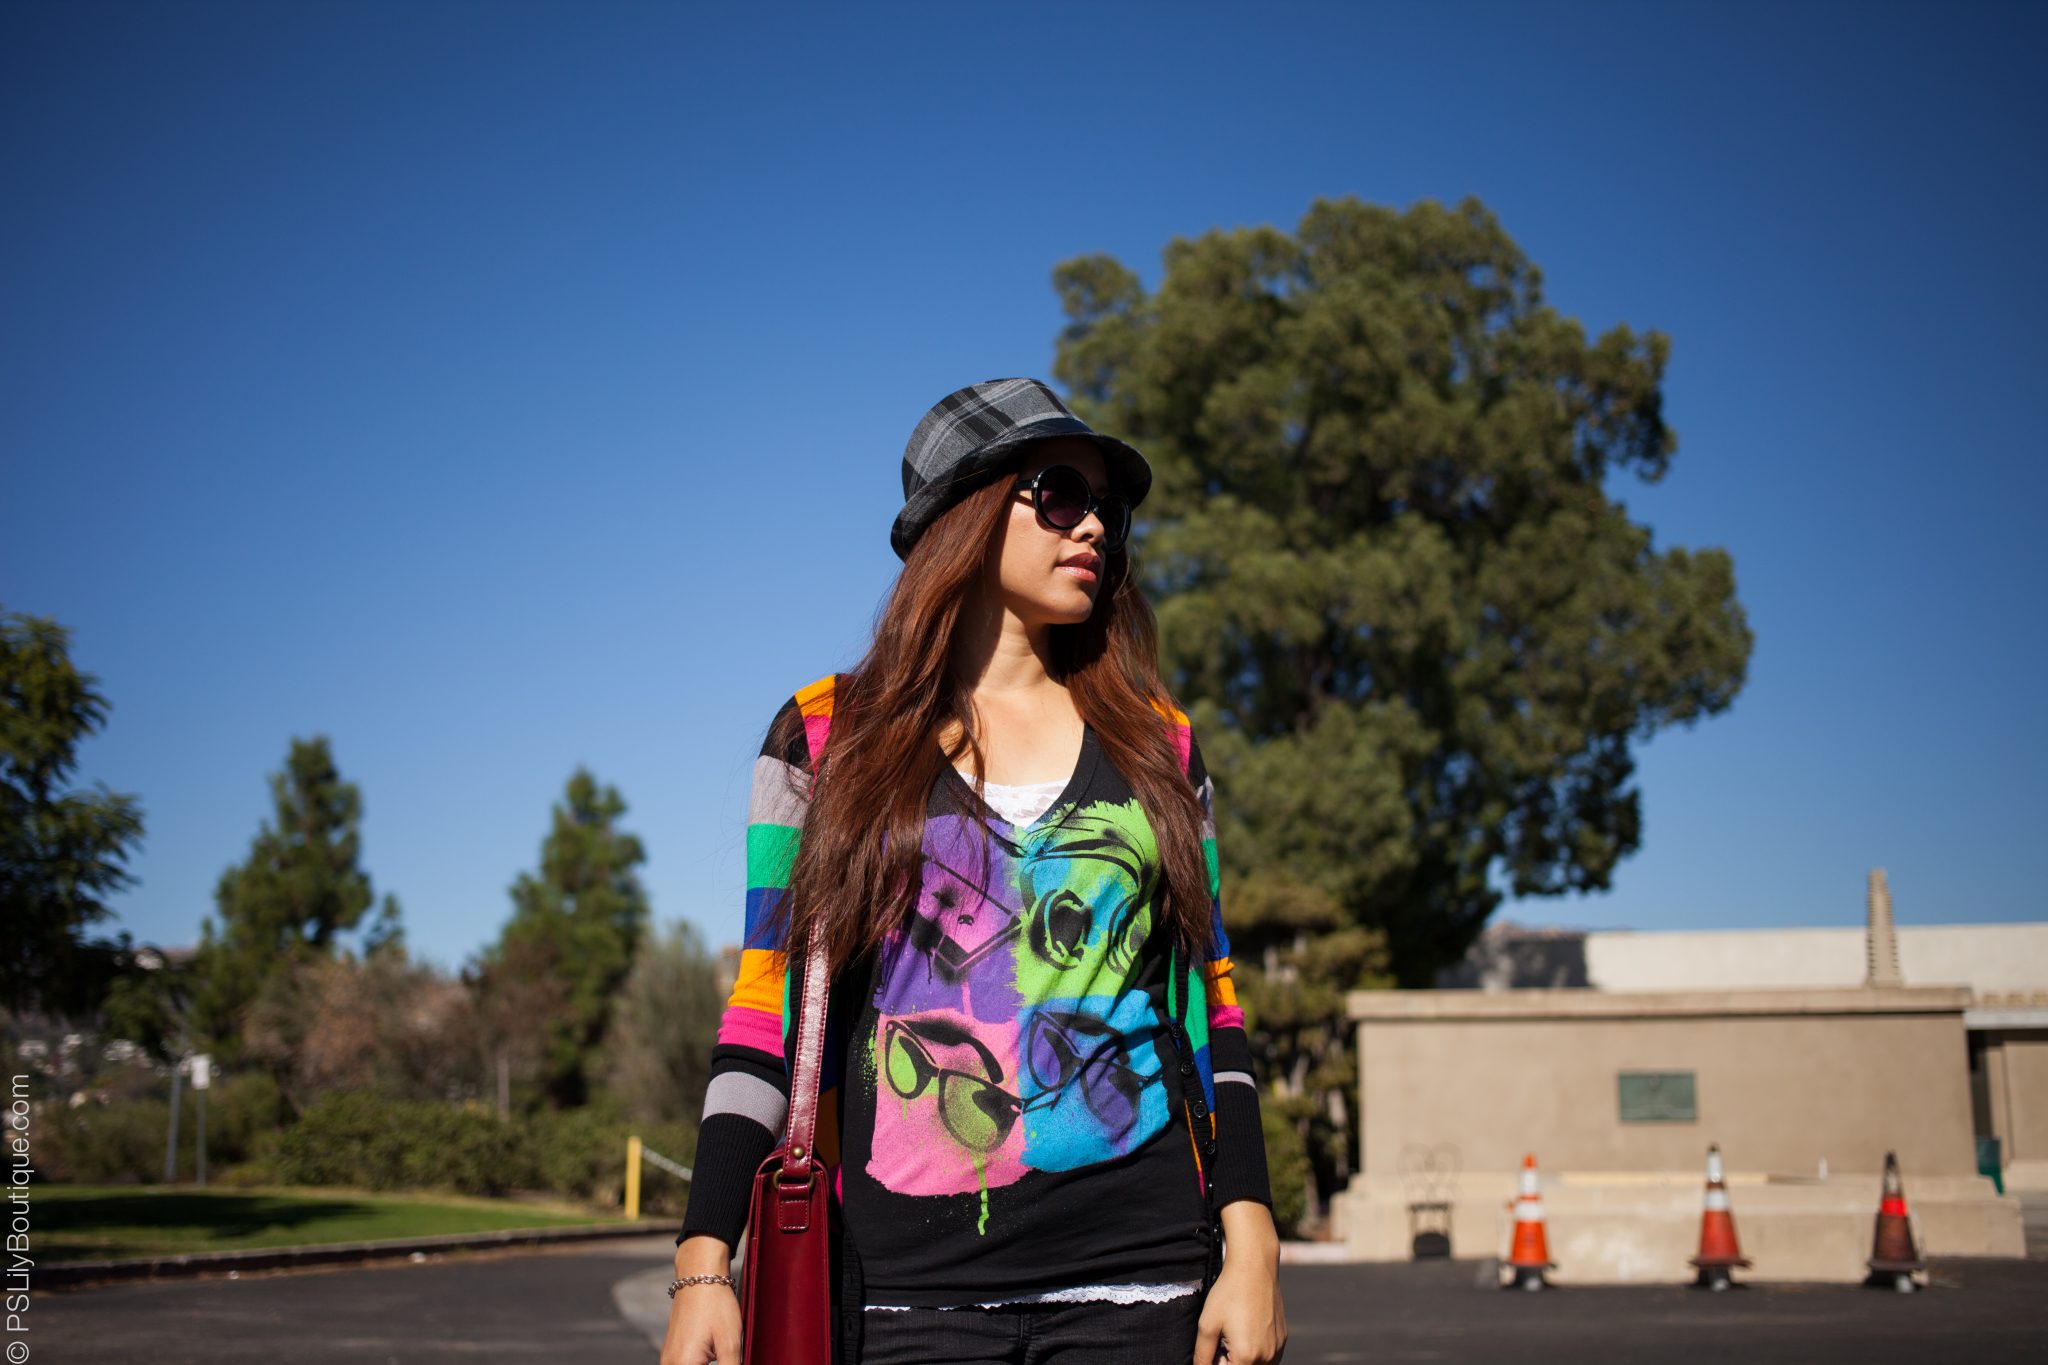 black-neon-graphic-tee, instagam-pslilyboutique, my style, denim, fall 2014 outfit ideas, cardigan, tee shirt, los angeles fashion blogger